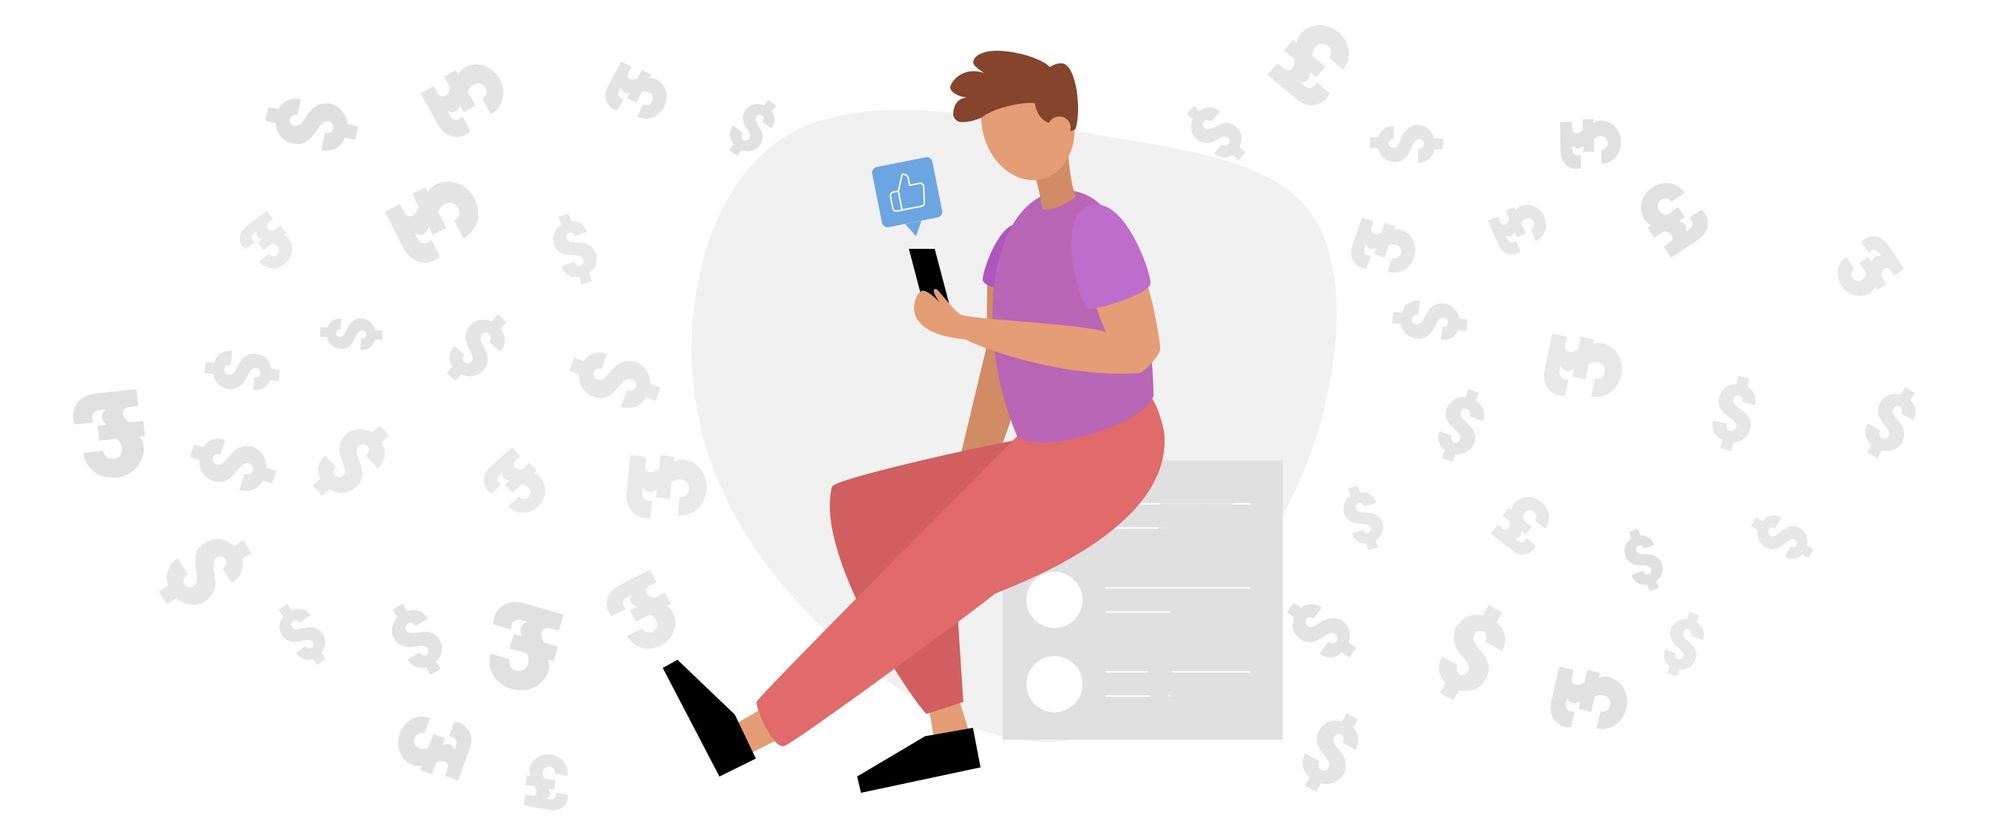 An illustrated person on their phone surrounded by pound and dollar signs